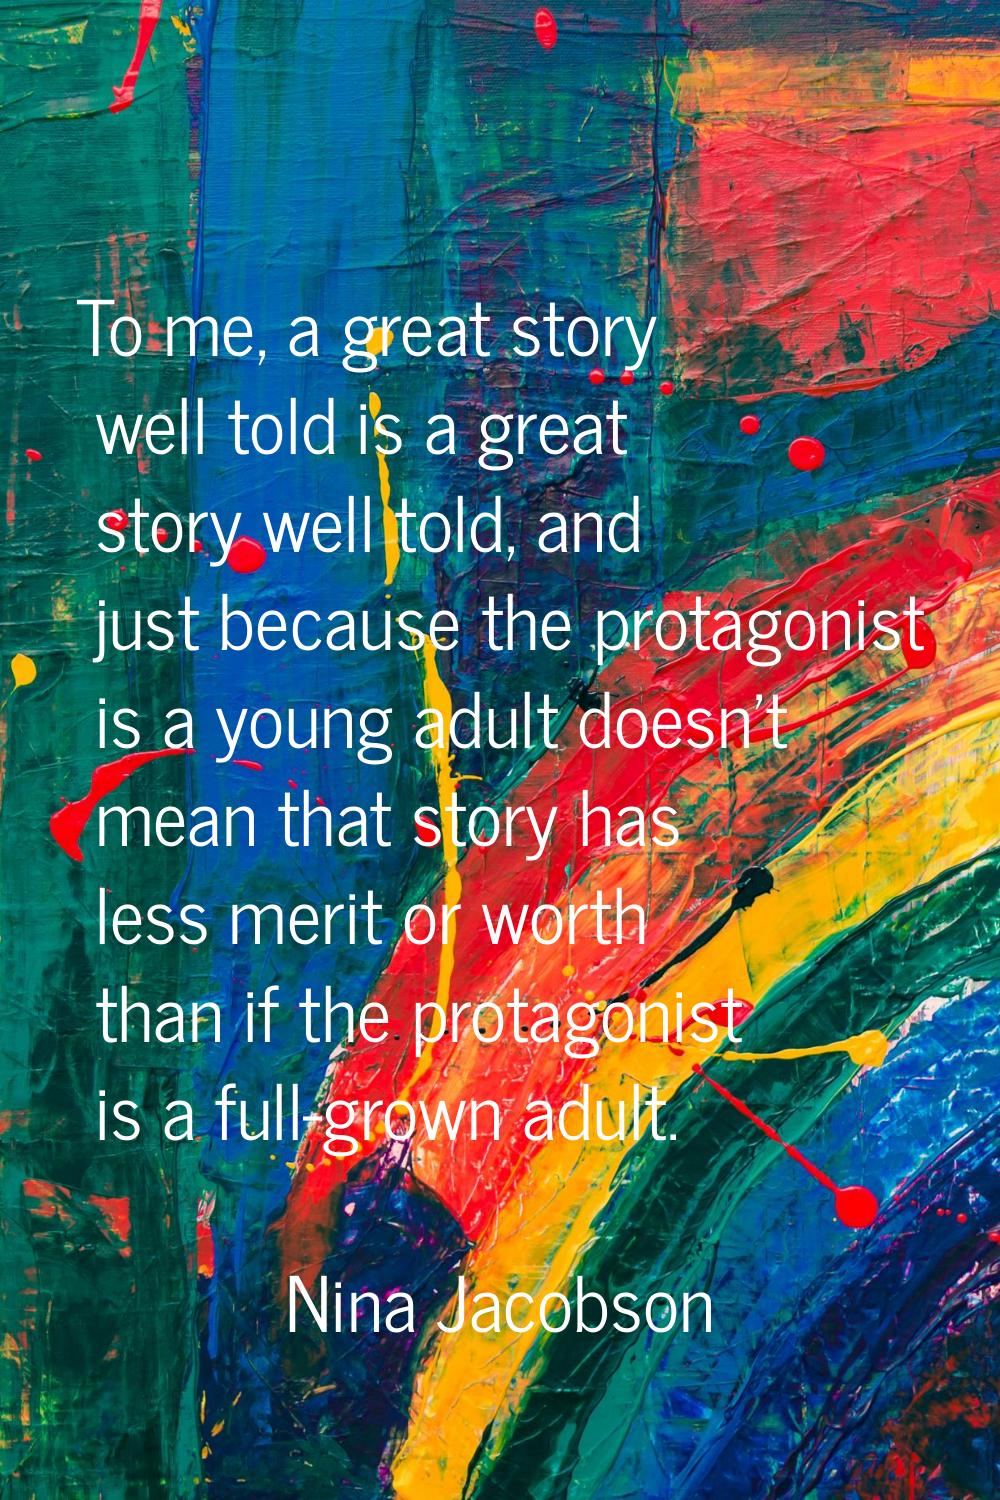 To me, a great story well told is a great story well told, and just because the protagonist is a yo